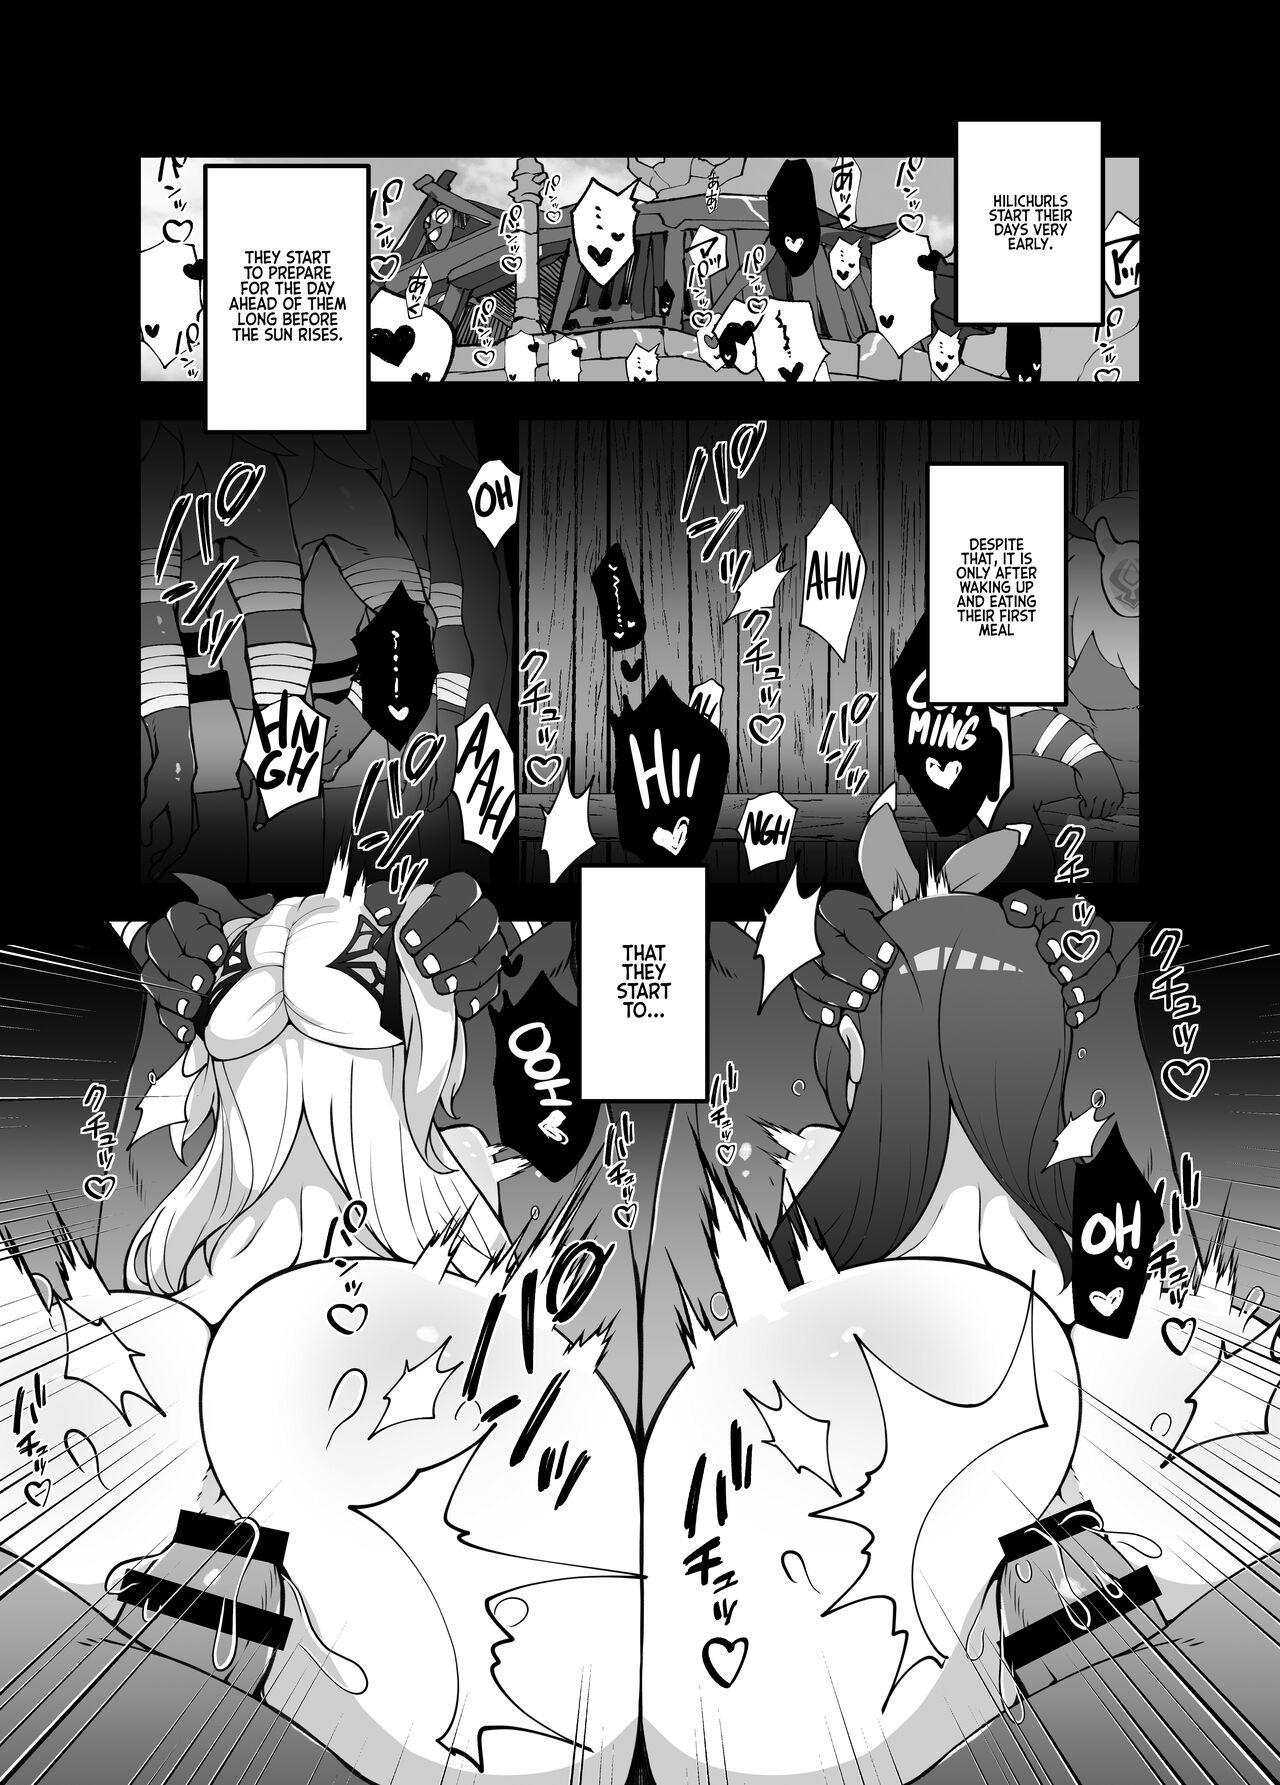 Futa [Karouke (Karou)] The Attack of the Hilichurls II ~The Invasion's Prelude~ Noelle,Chivalric Blossom that withered~ (Genshin Impact) [English] [Kyuume] [Digital] - Genshin impact Perfect Tits - Page 3